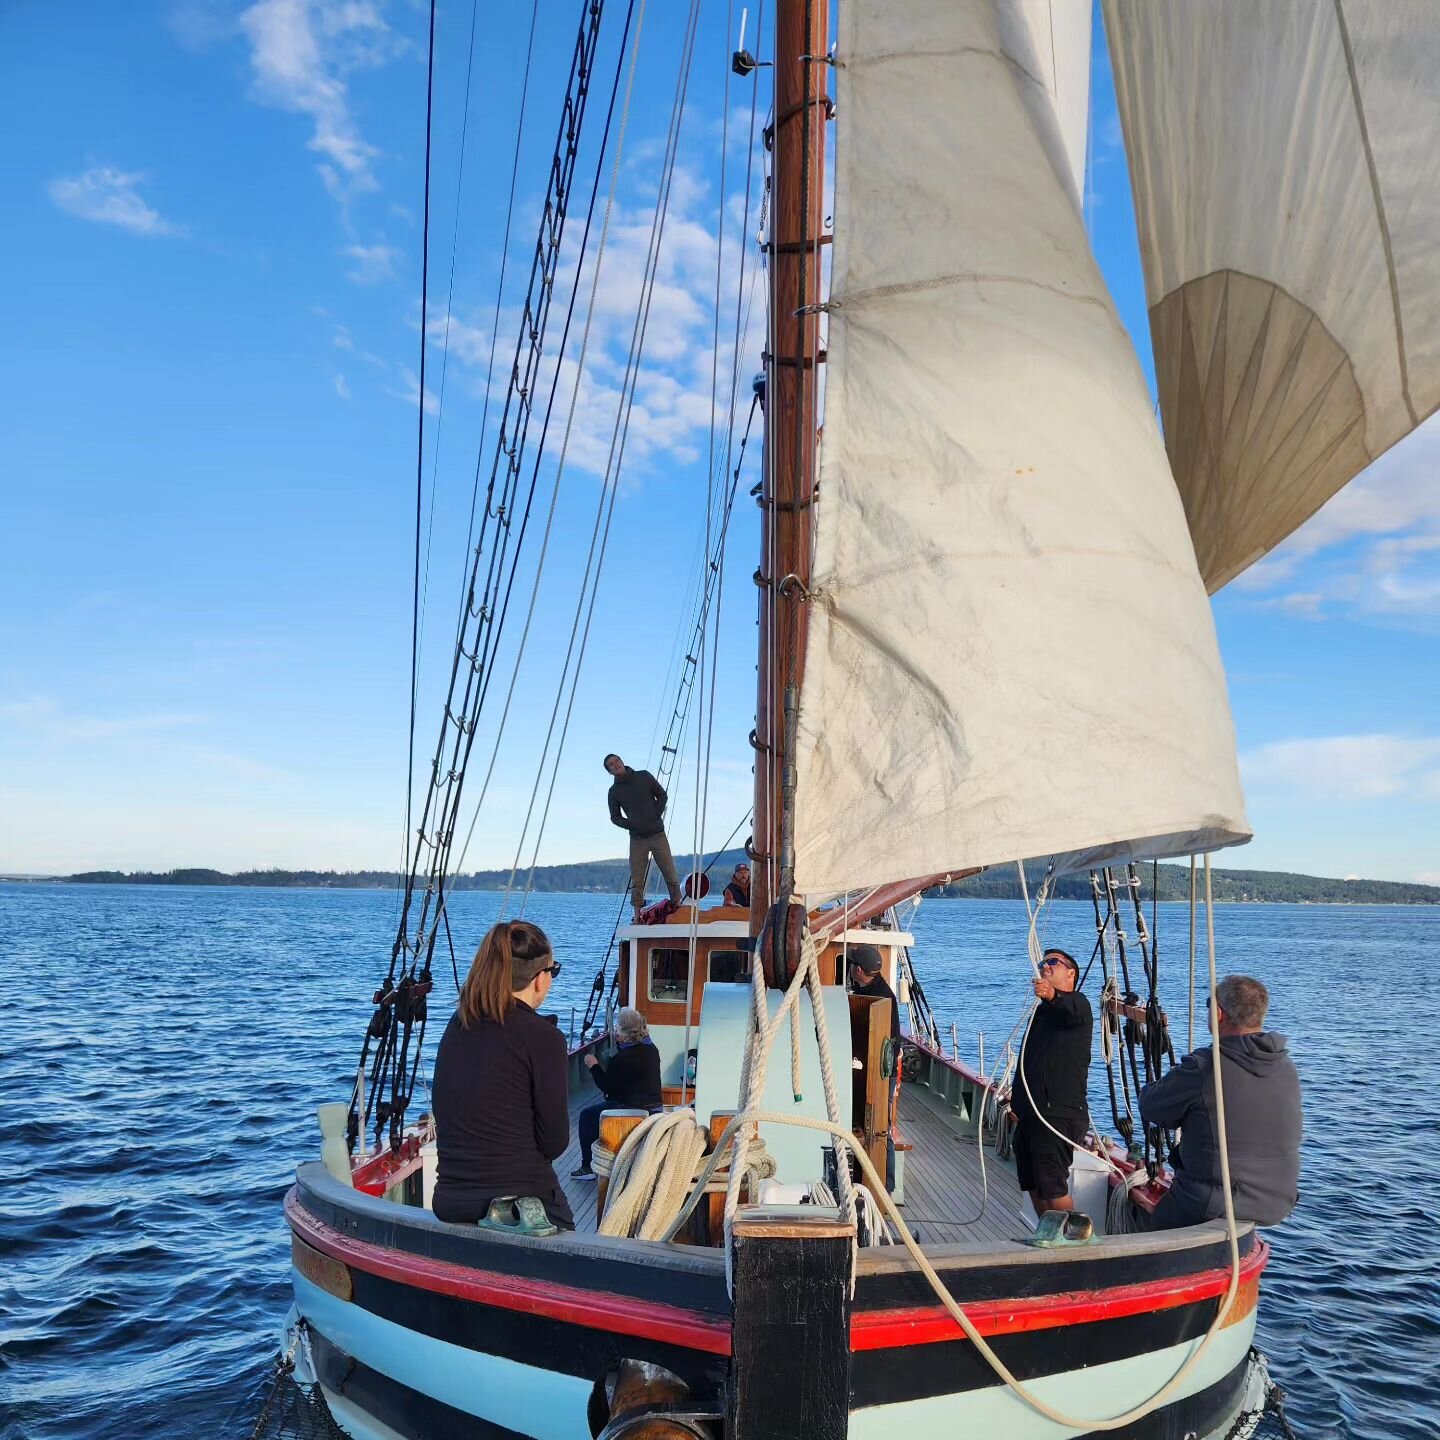 ✨️May Long Weekend discounts!

Join the crew of Providence Tall Ship for an afternoon or sunset cruise from Port Sidney Marina ⛵️

👉 May 19-21
👉 3 hour tours departing at 1pm and 5:30pm
👉 $109 per person
🧺 Pack your own picnic, wine, and have a g